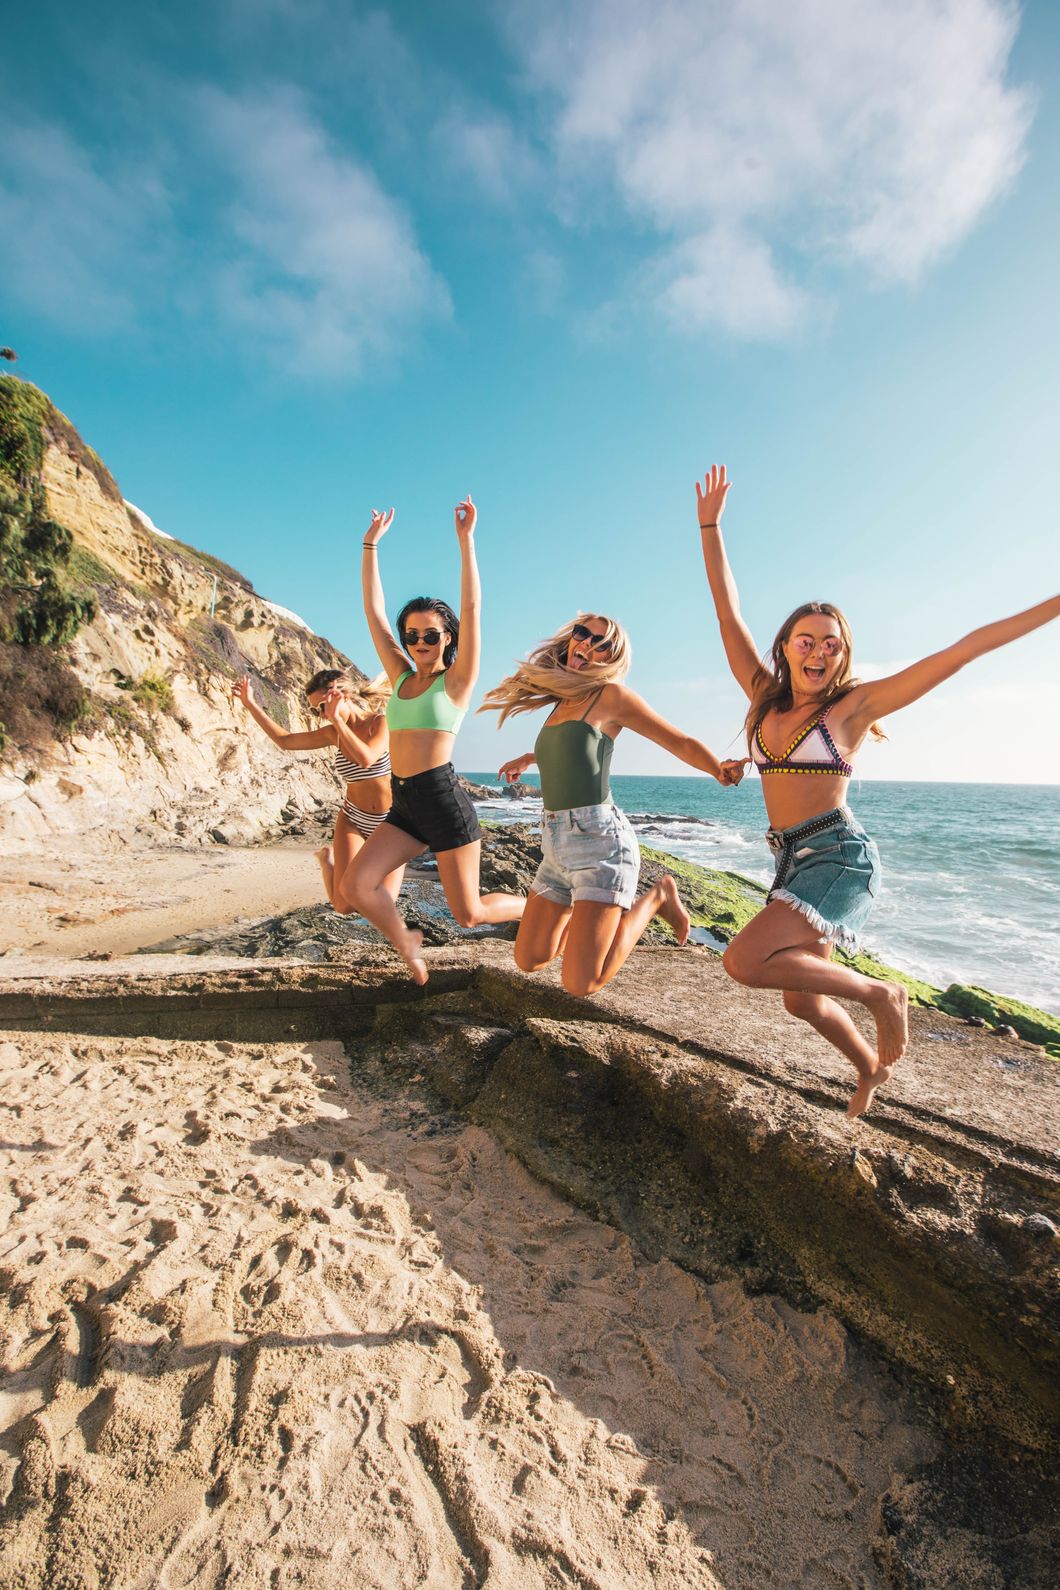 27 Ways To Be ​Kind And Have Fun With Your F​riends​